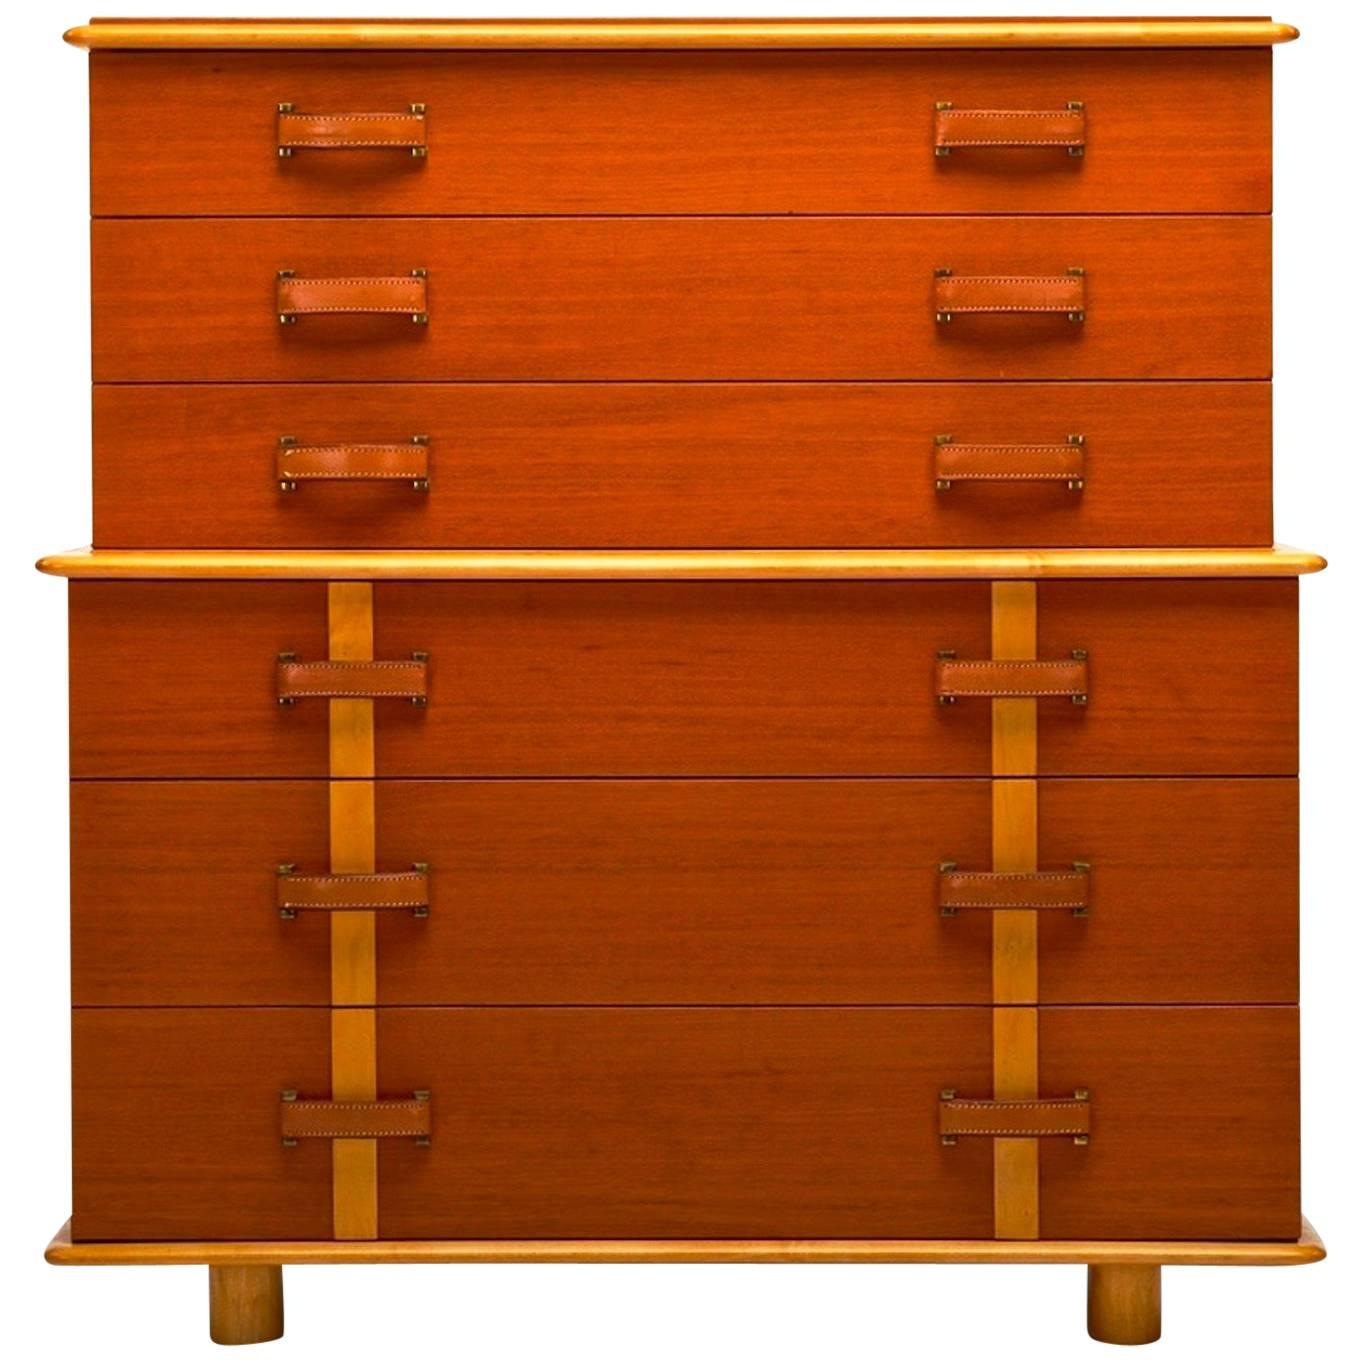 Paul T. Frankl "Station Wagon" Tall Chest of Drawers